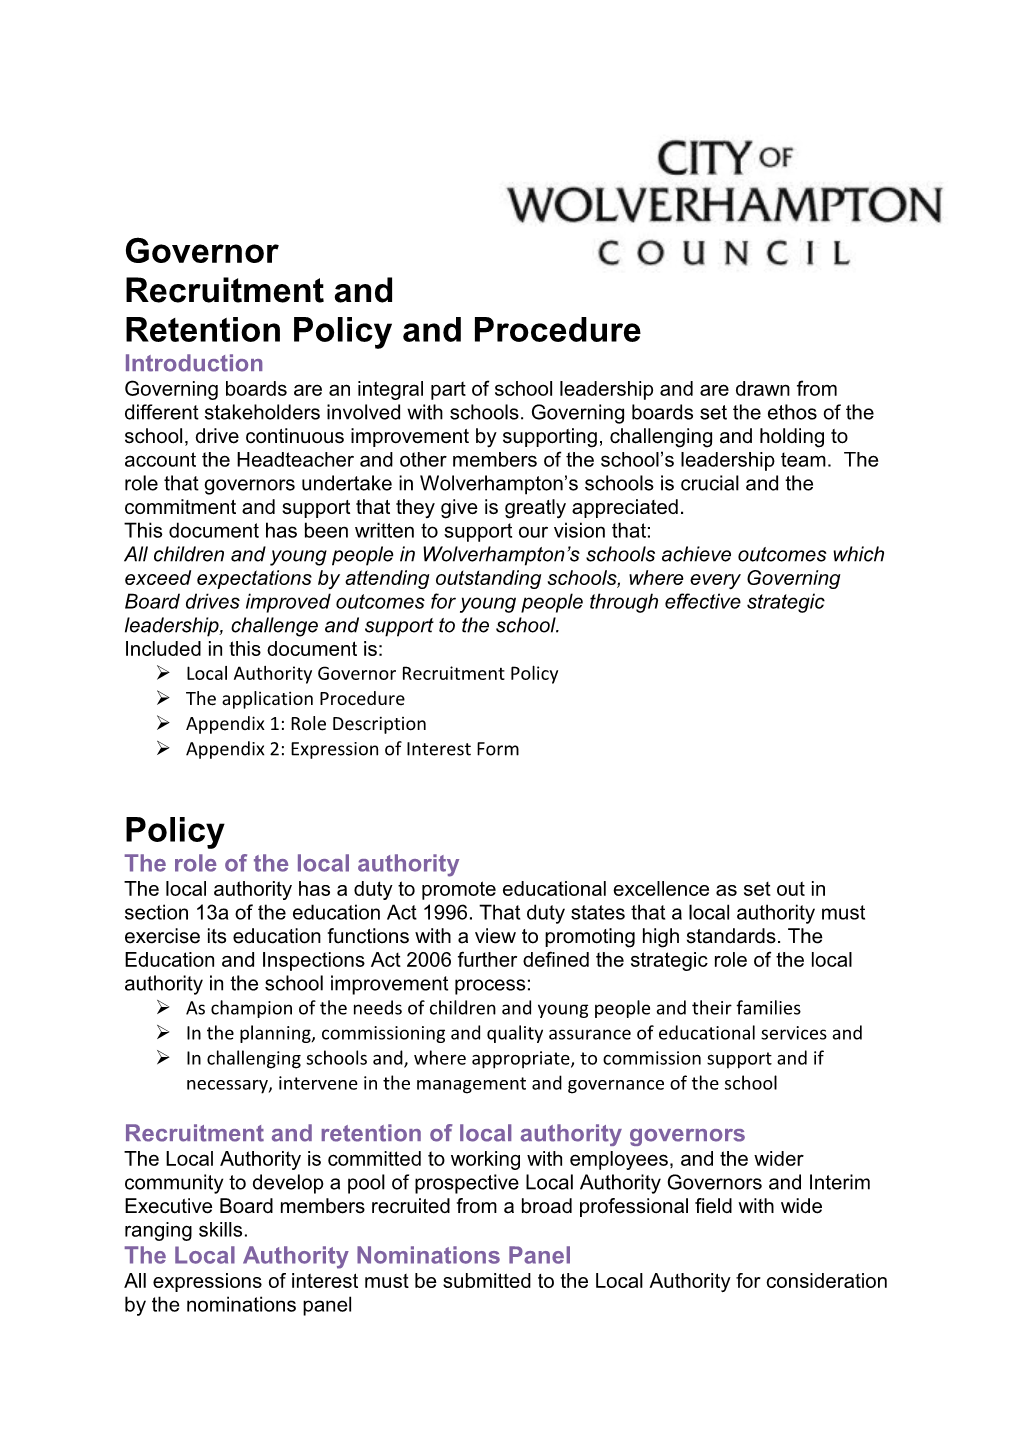 Governor Recruitment and Retention Policy and Procedure